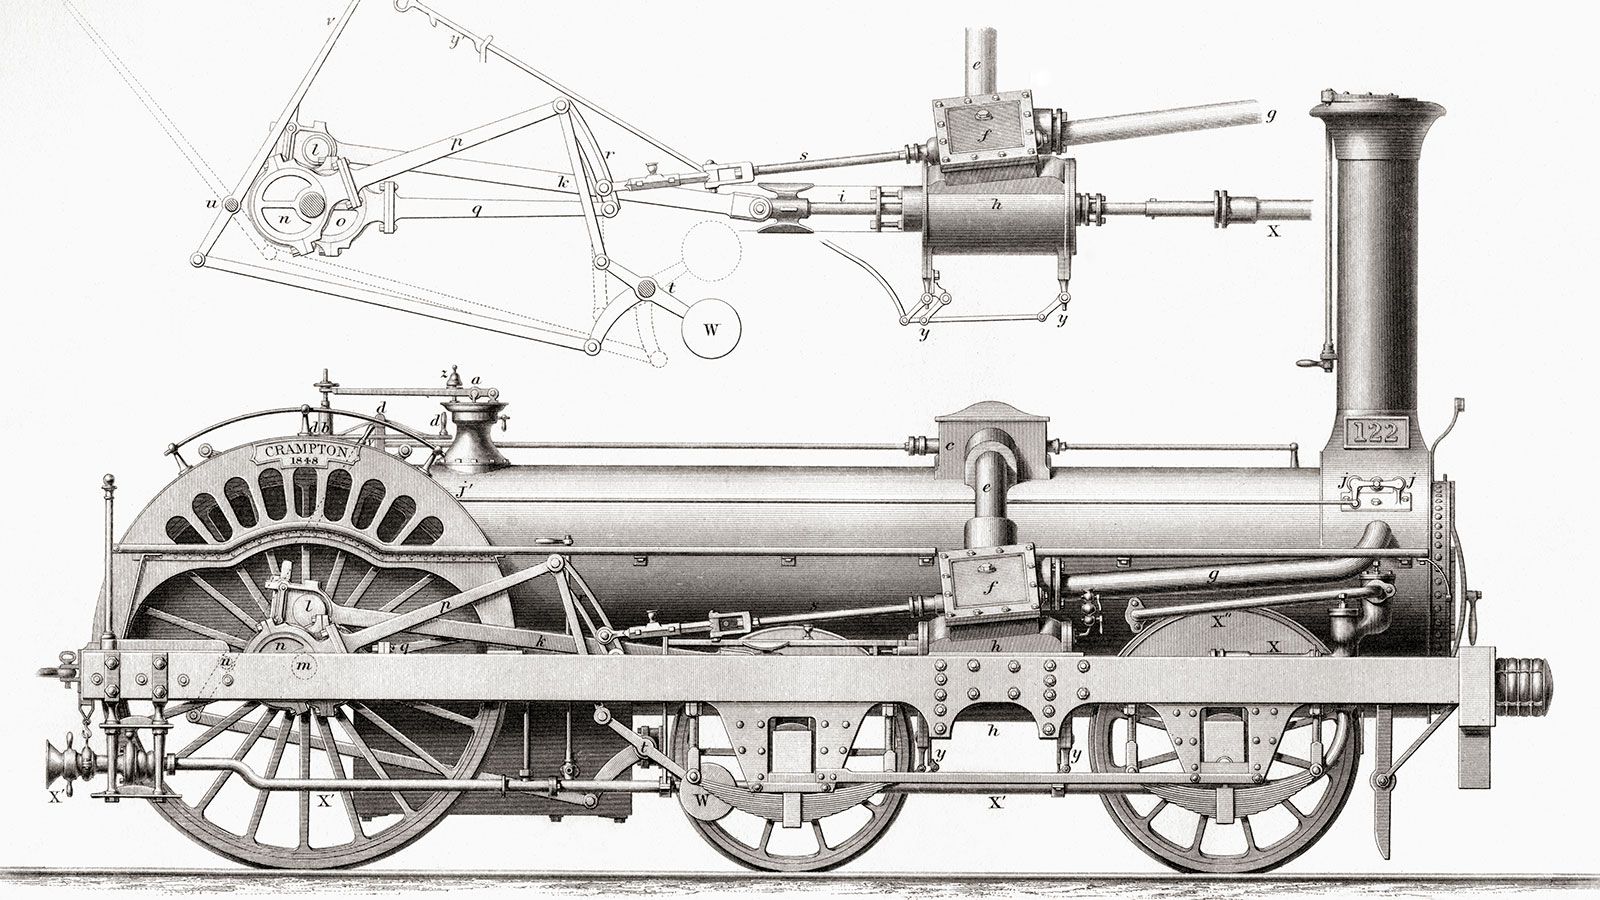 Exploring 19th Century Inventions: A Pictorial Journey